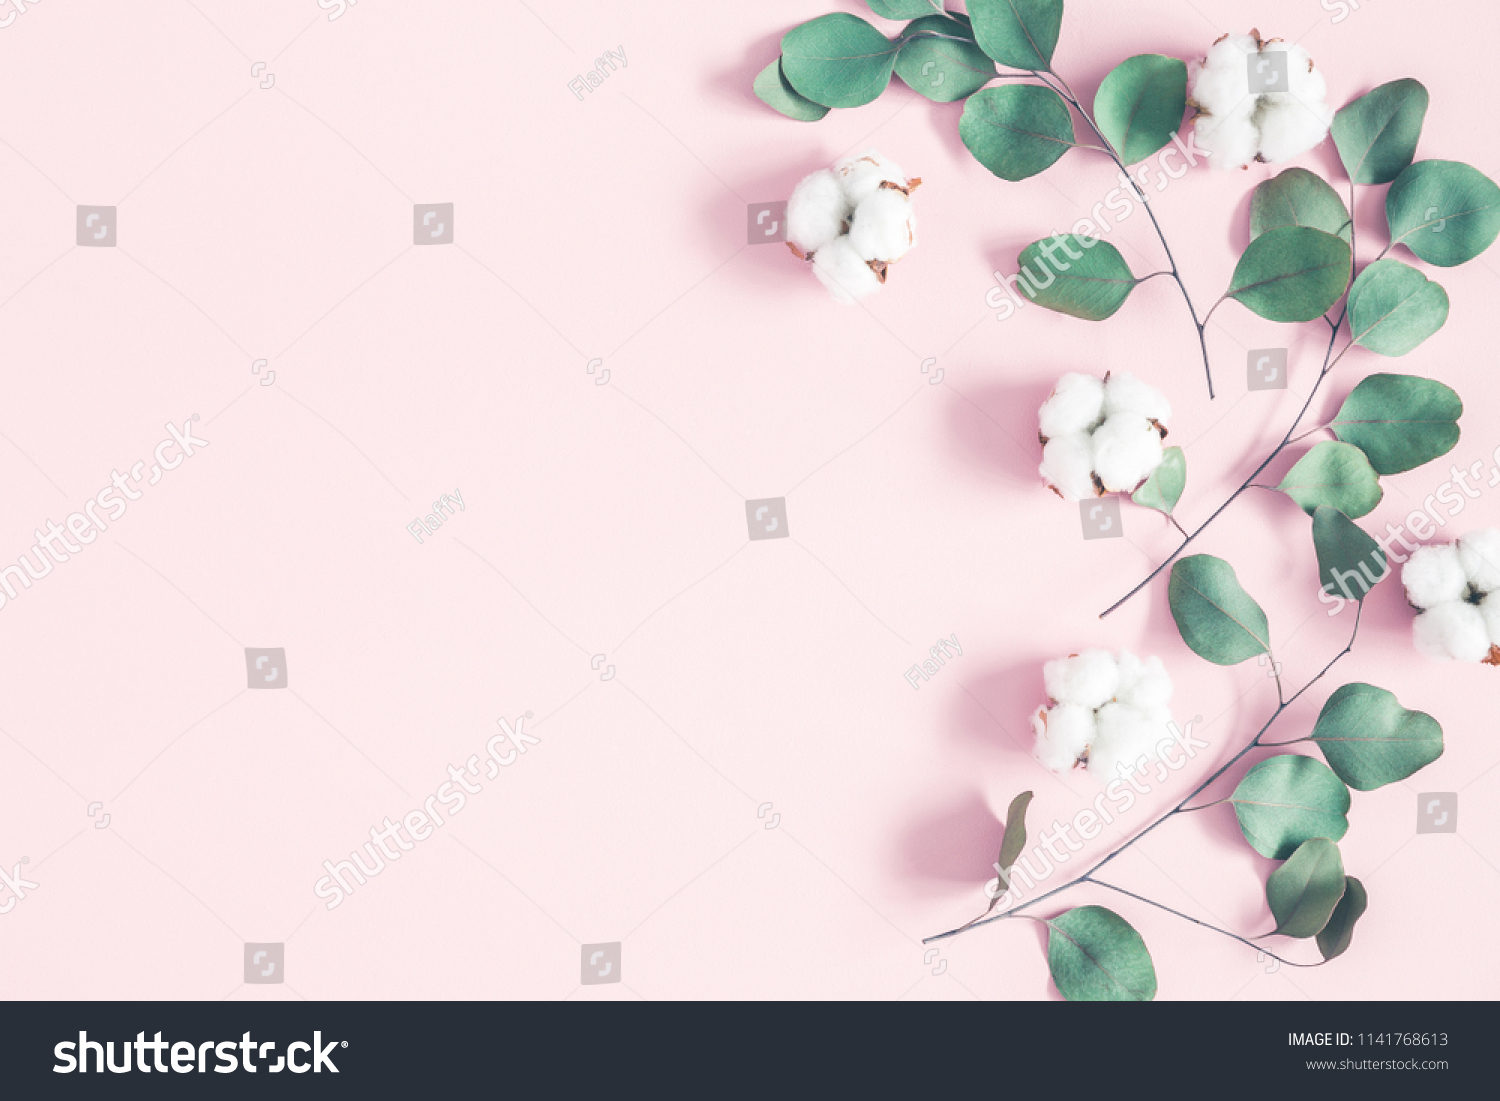 Eucalyptus leaves and cotton flowers on pastel pink background. Flat lay, top view #1141768613